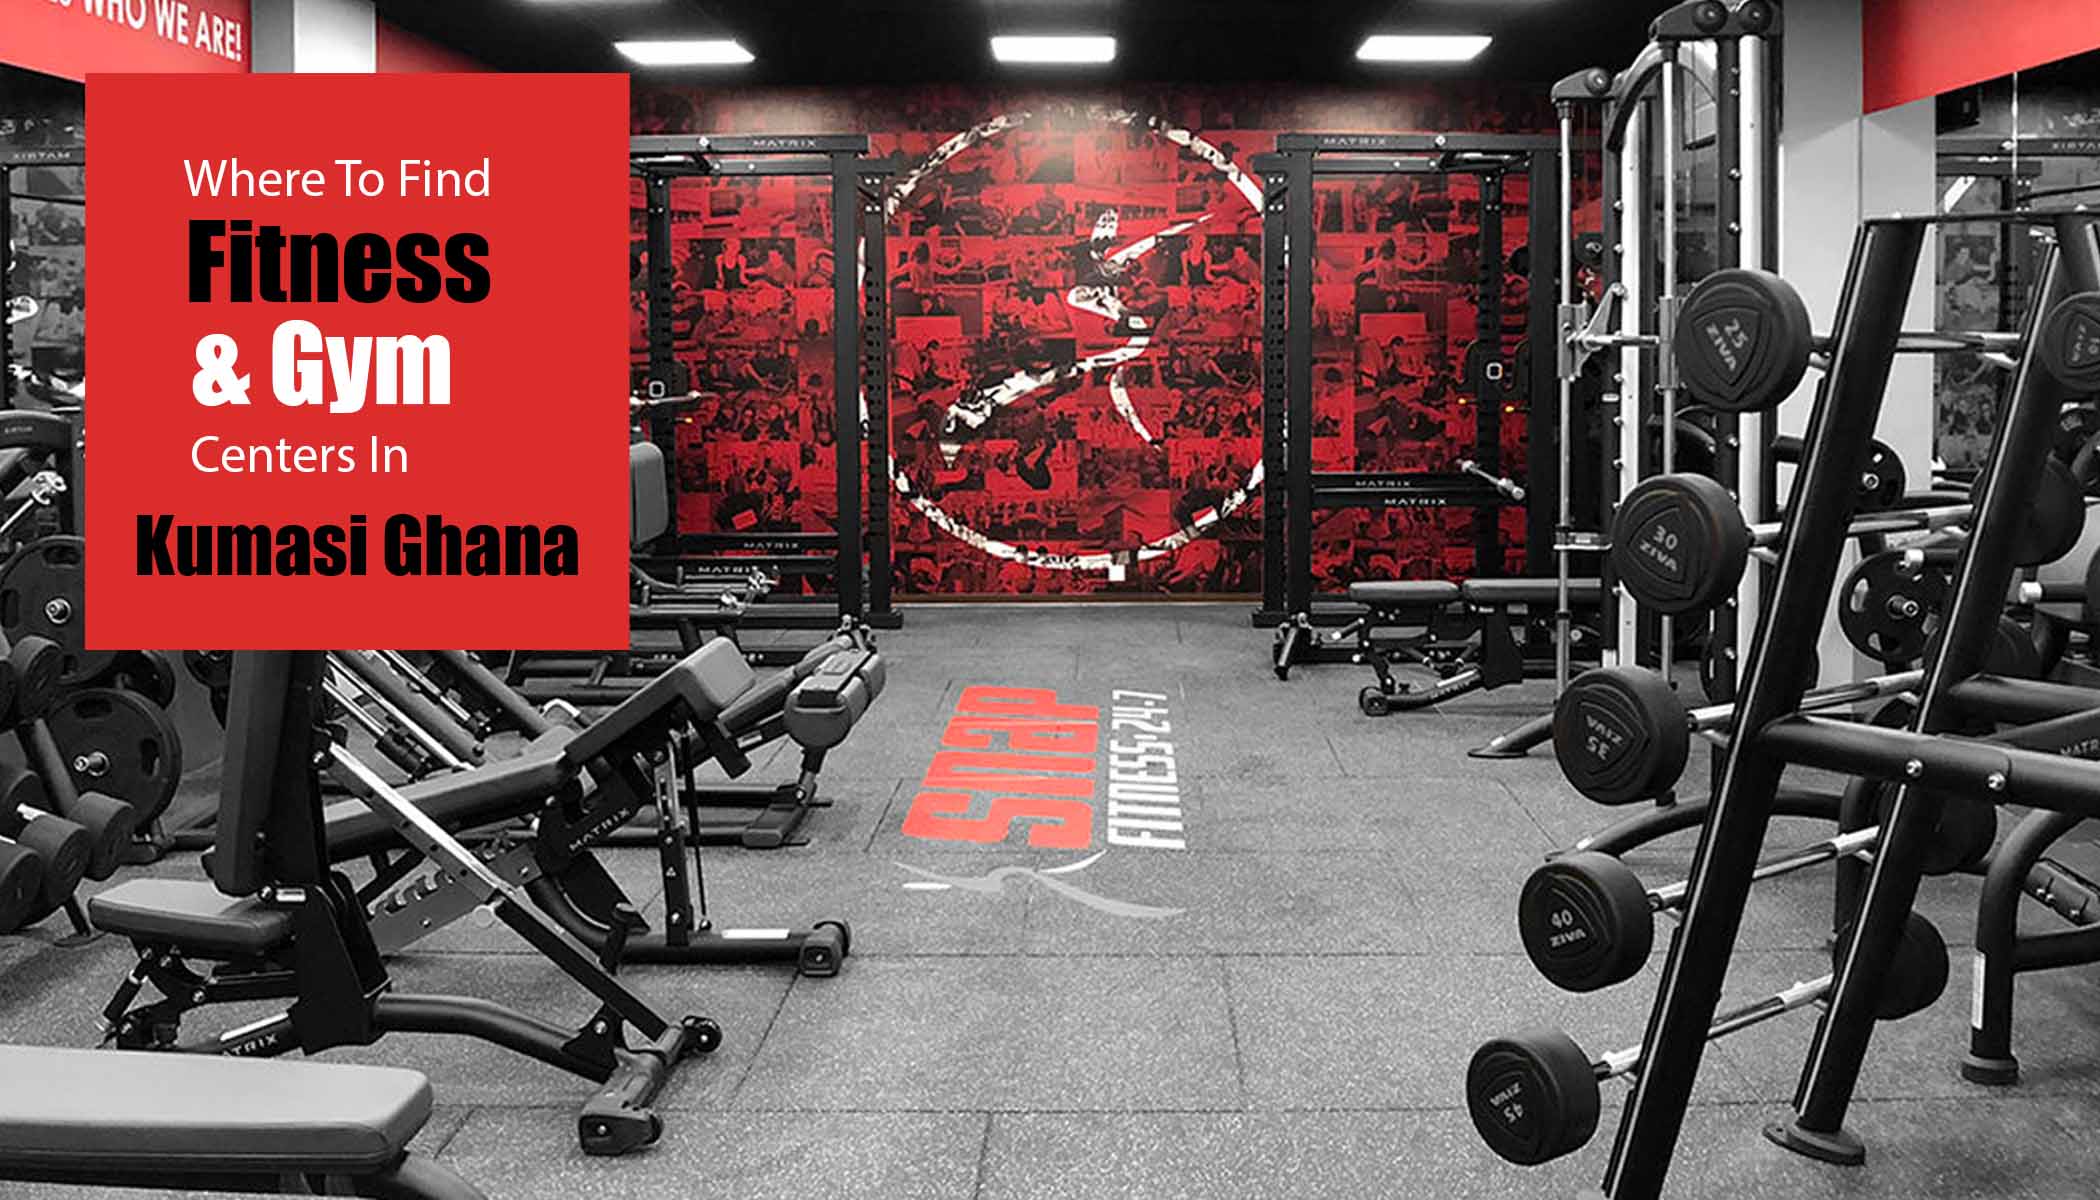 Where to Find Fitness and Gym Centers in Kumasi Ghana